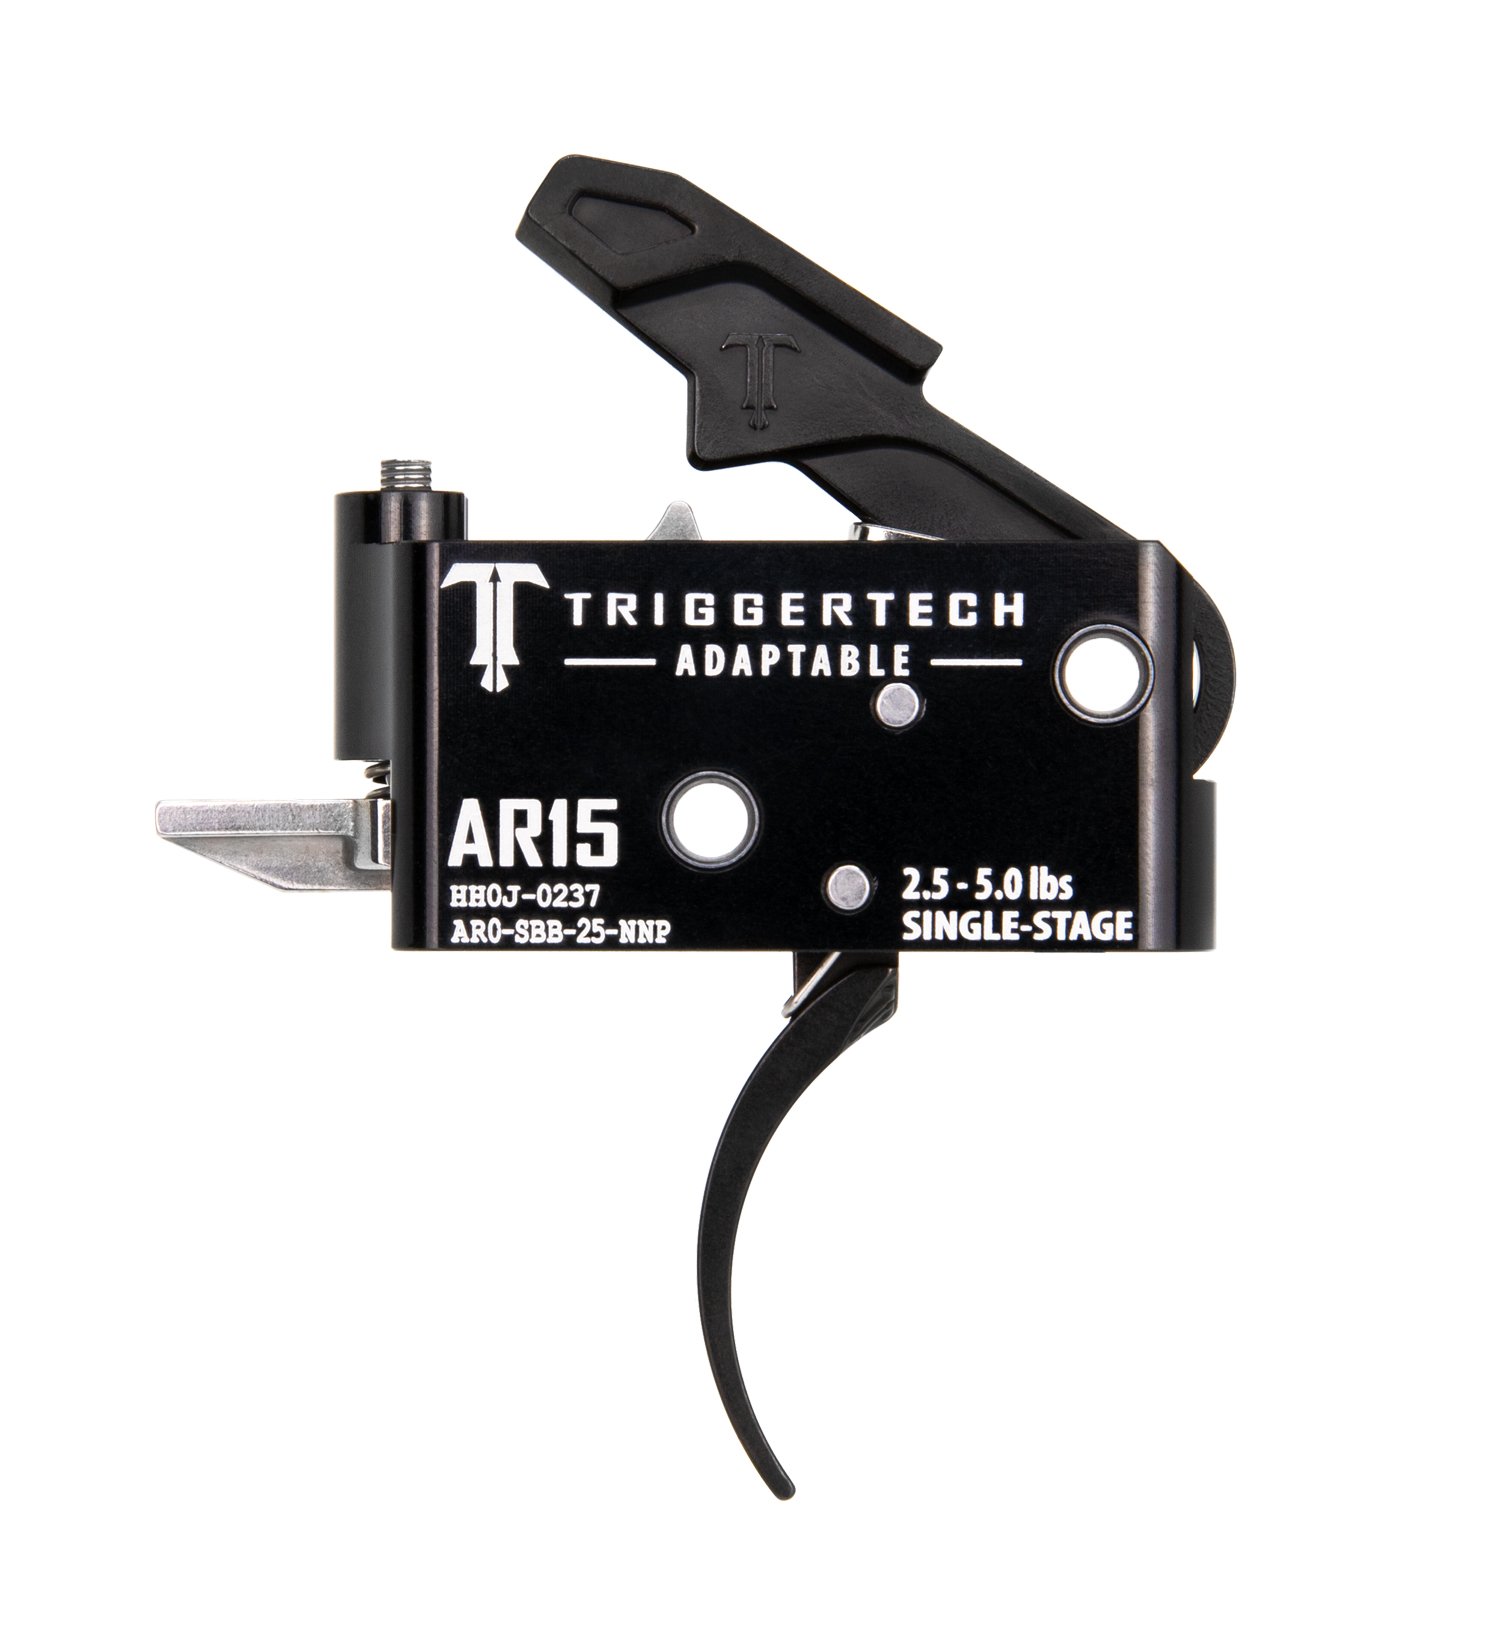 TRIGGERTECH - AR15 SINGLE-STAGE ADAPTABLE TRIGGERS